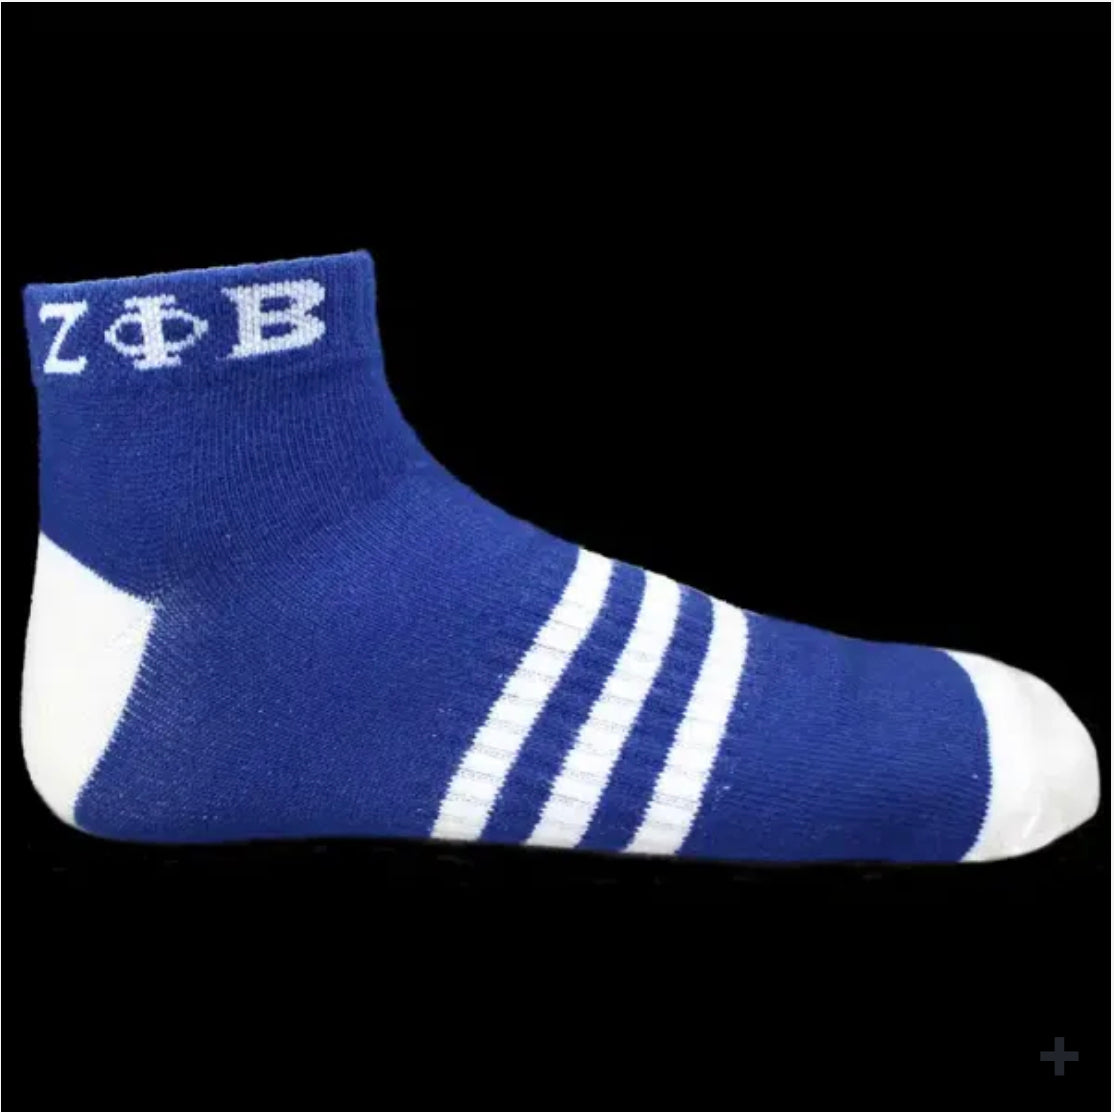 ZPD Ankle socks blue with white